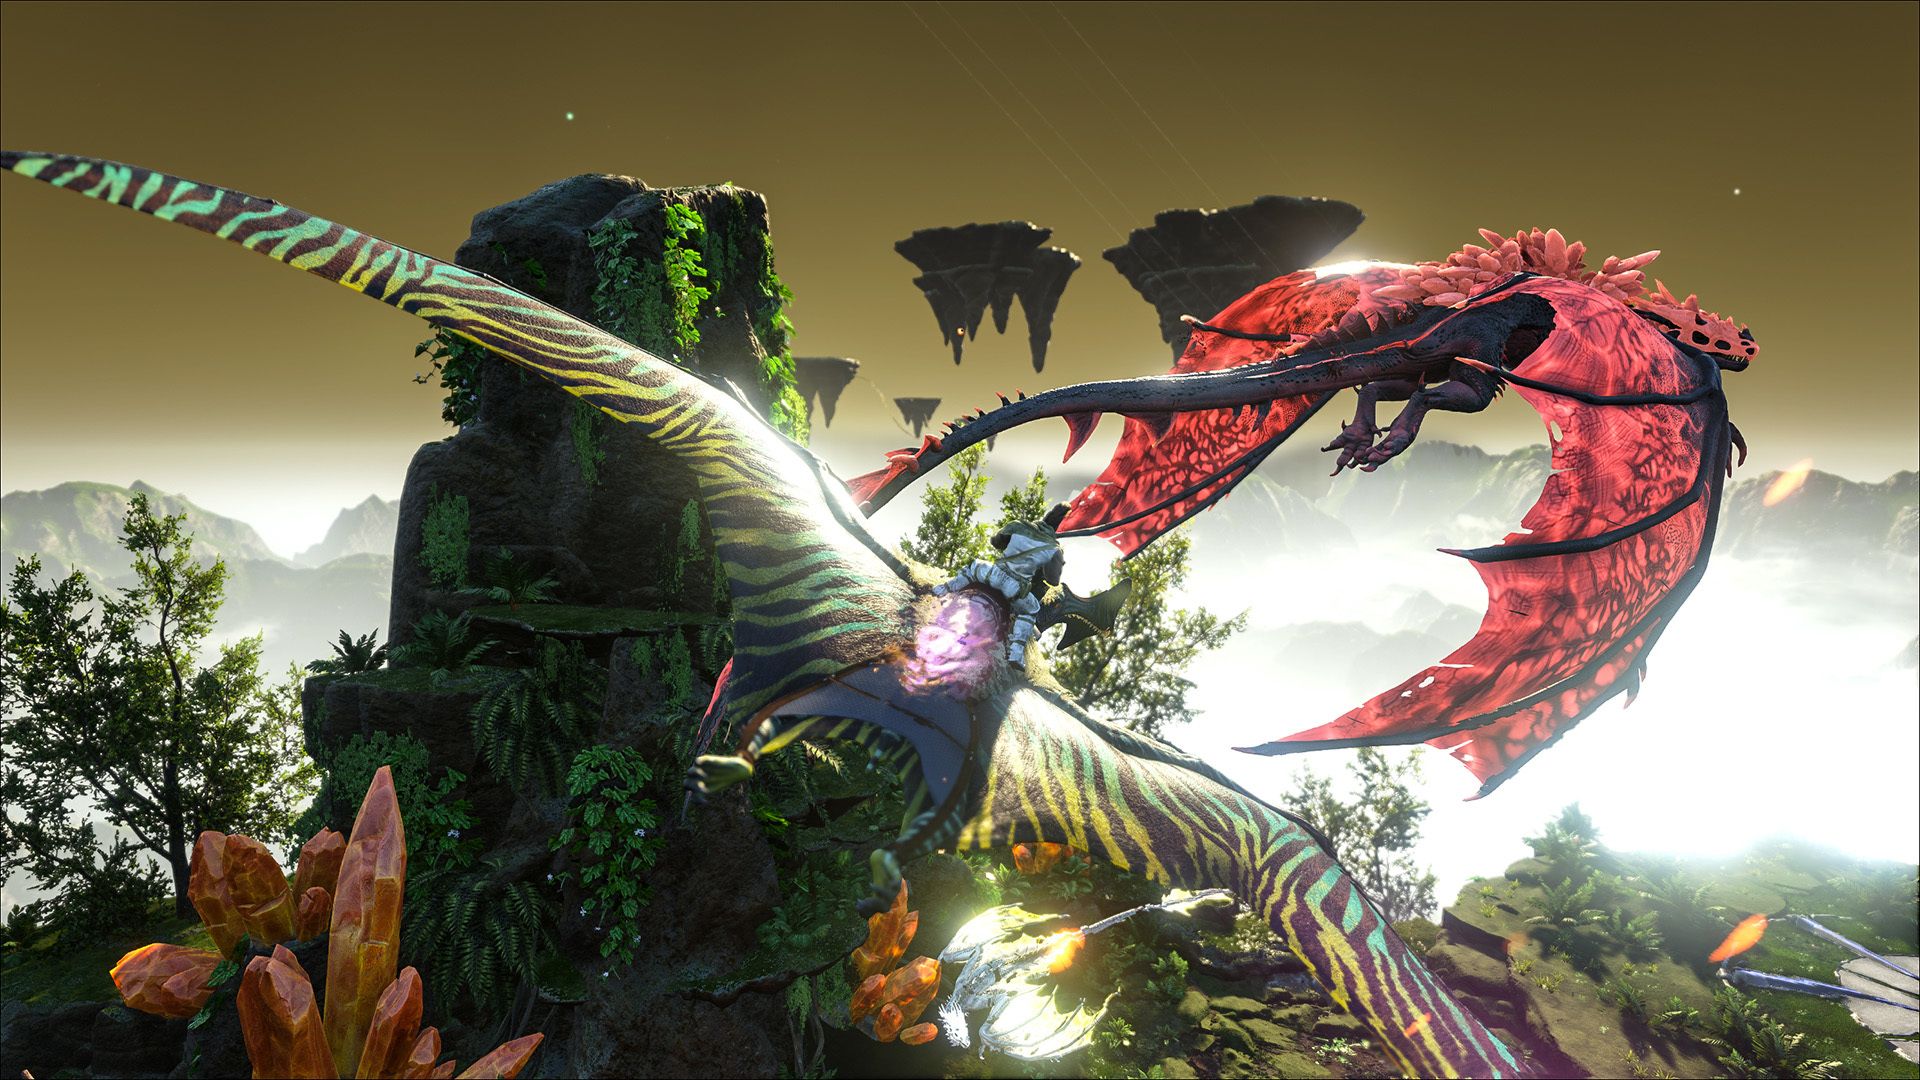  ARK: Survival Evolved Hintergrundbild 1920x1080. ARK: Survival Evolved celebrates 5 years, is free on Epic Games Store for one week